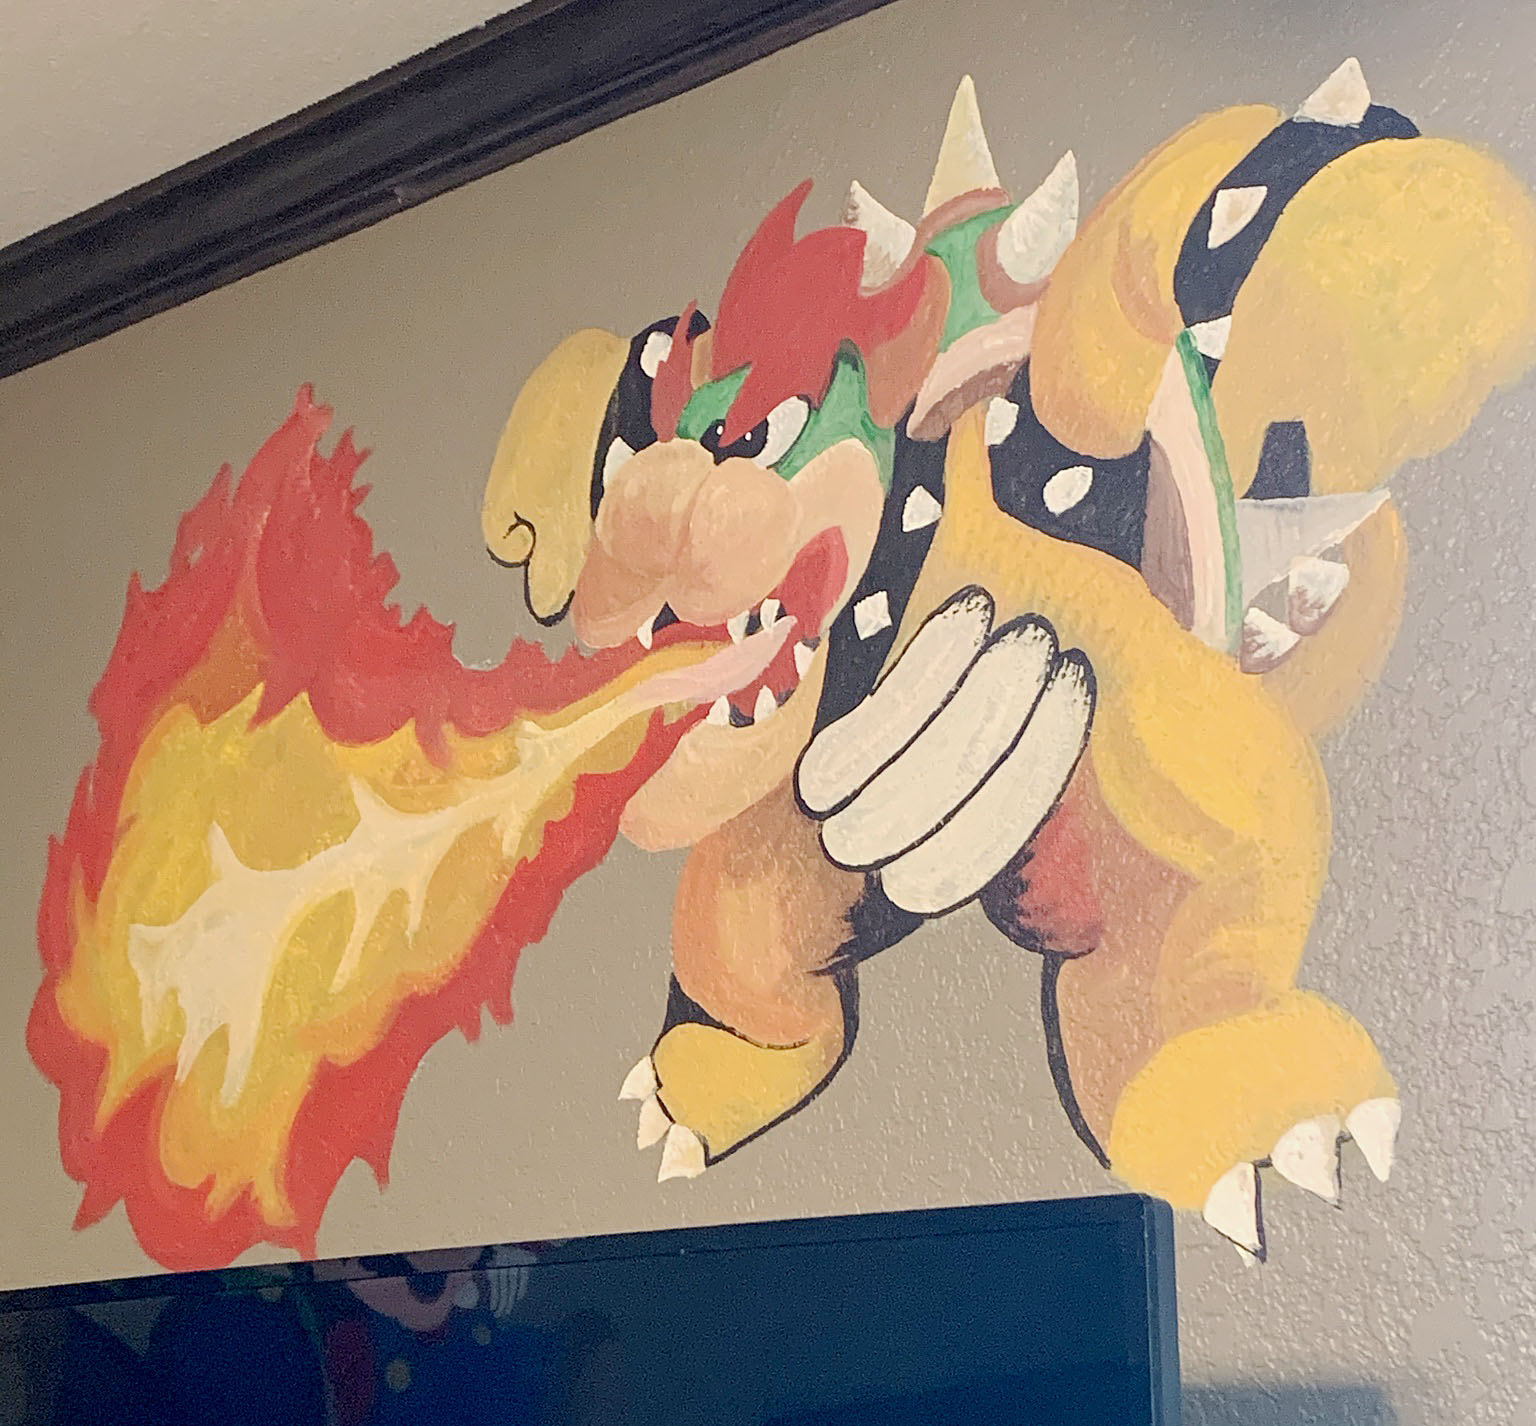 Painted mural of Mario Brothers video game on a wall in a boys bedroom